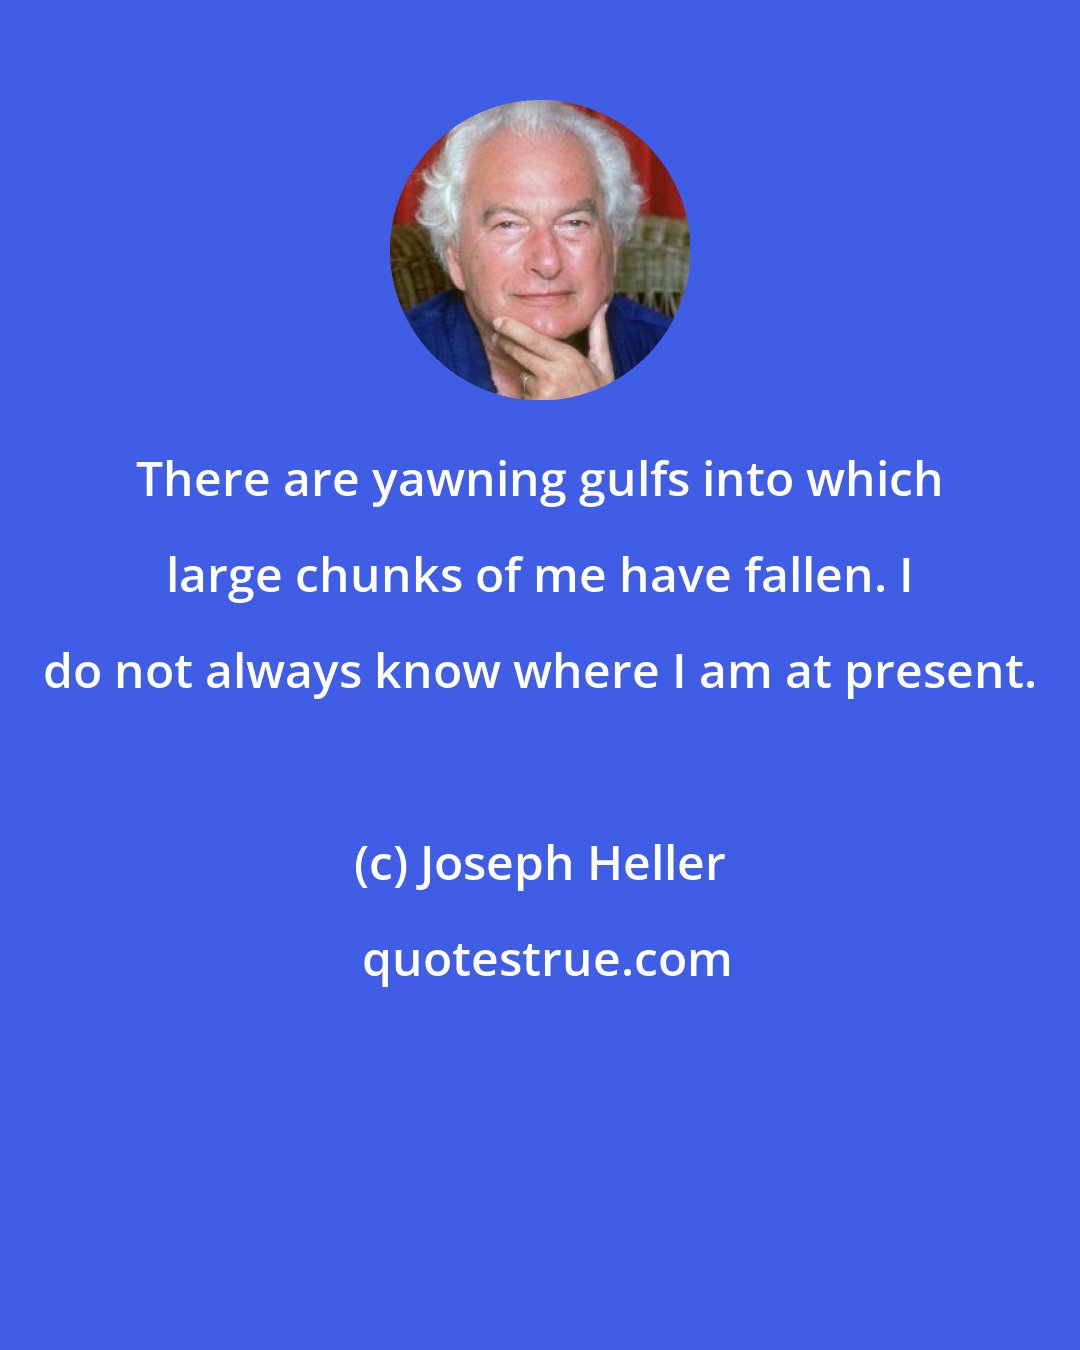 Joseph Heller: There are yawning gulfs into which large chunks of me have fallen. I do not always know where I am at present.